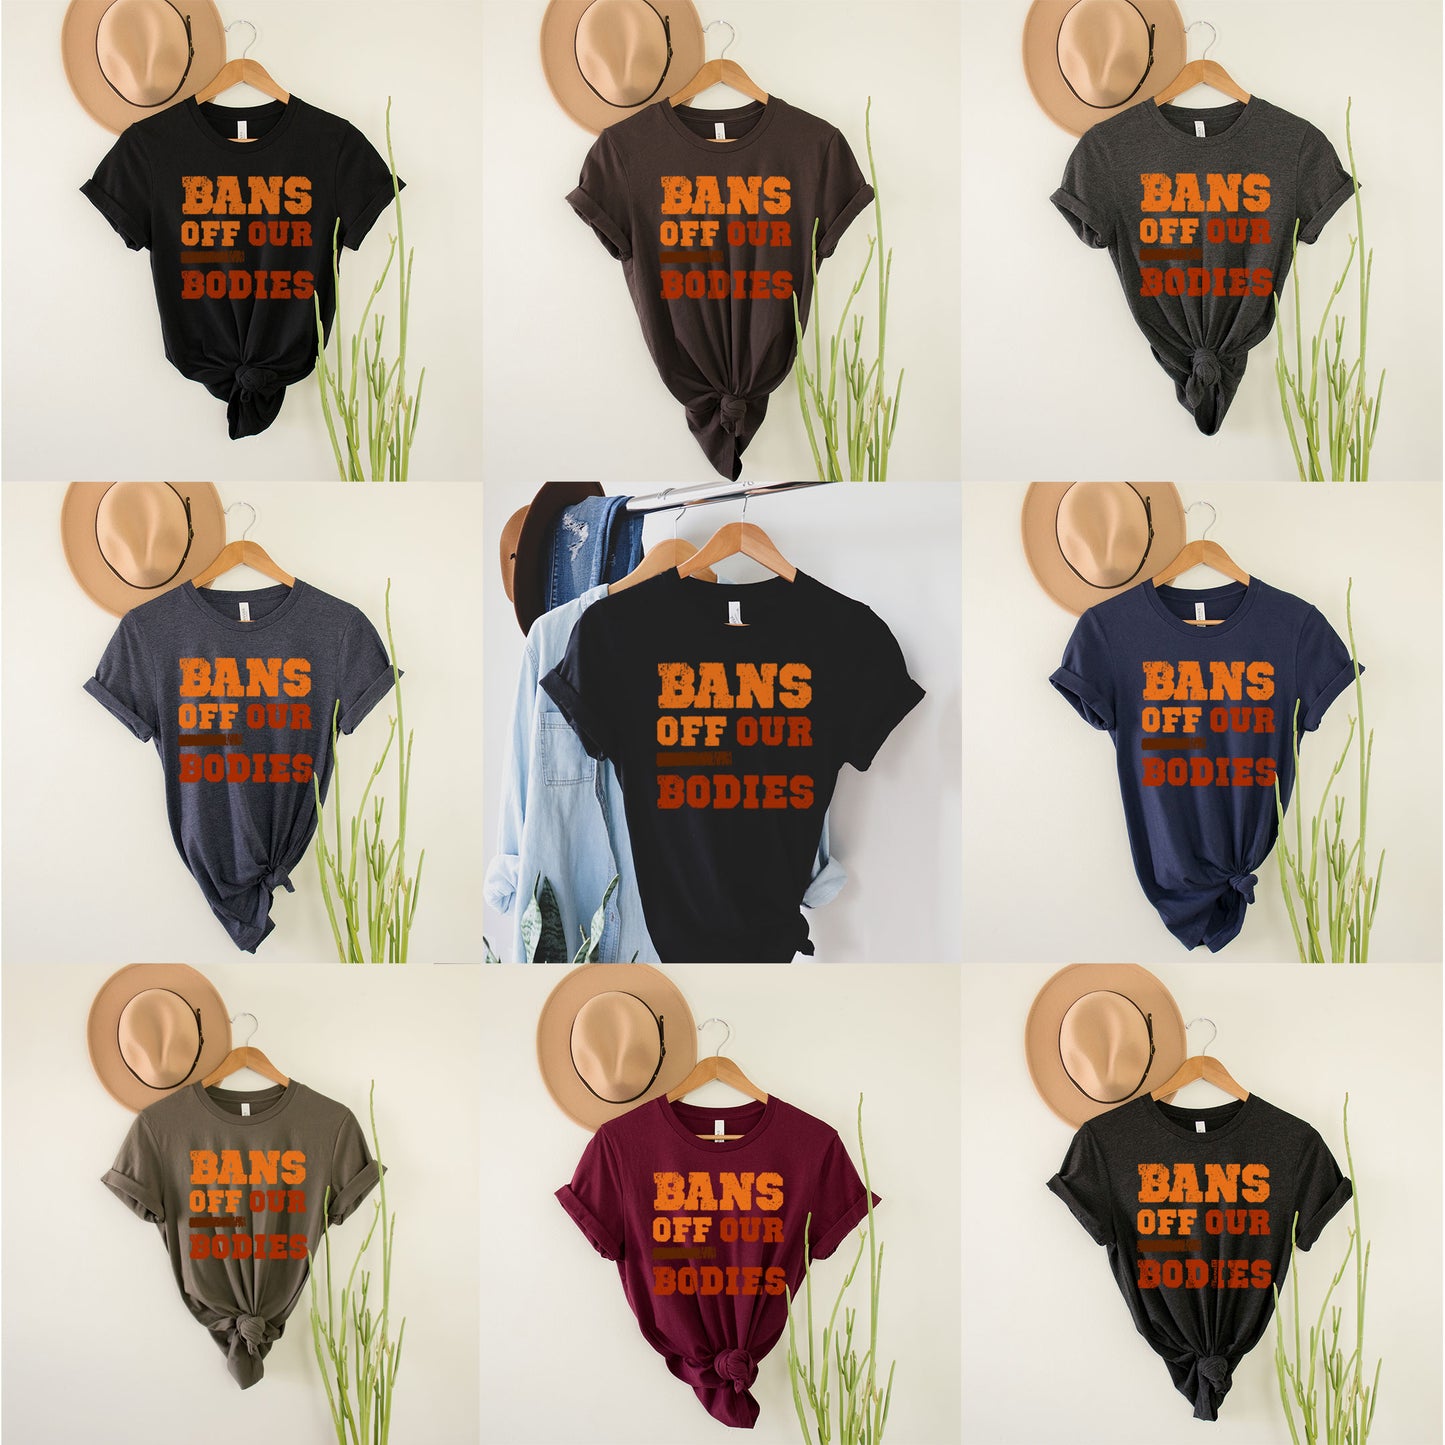 Bans Off Our Bodies Shirt, My Body My Choice T-Shirt, Pro Choice Shirt, Womens Rights Protest Shirt, Womens Rights March Feminist Roe Shirt